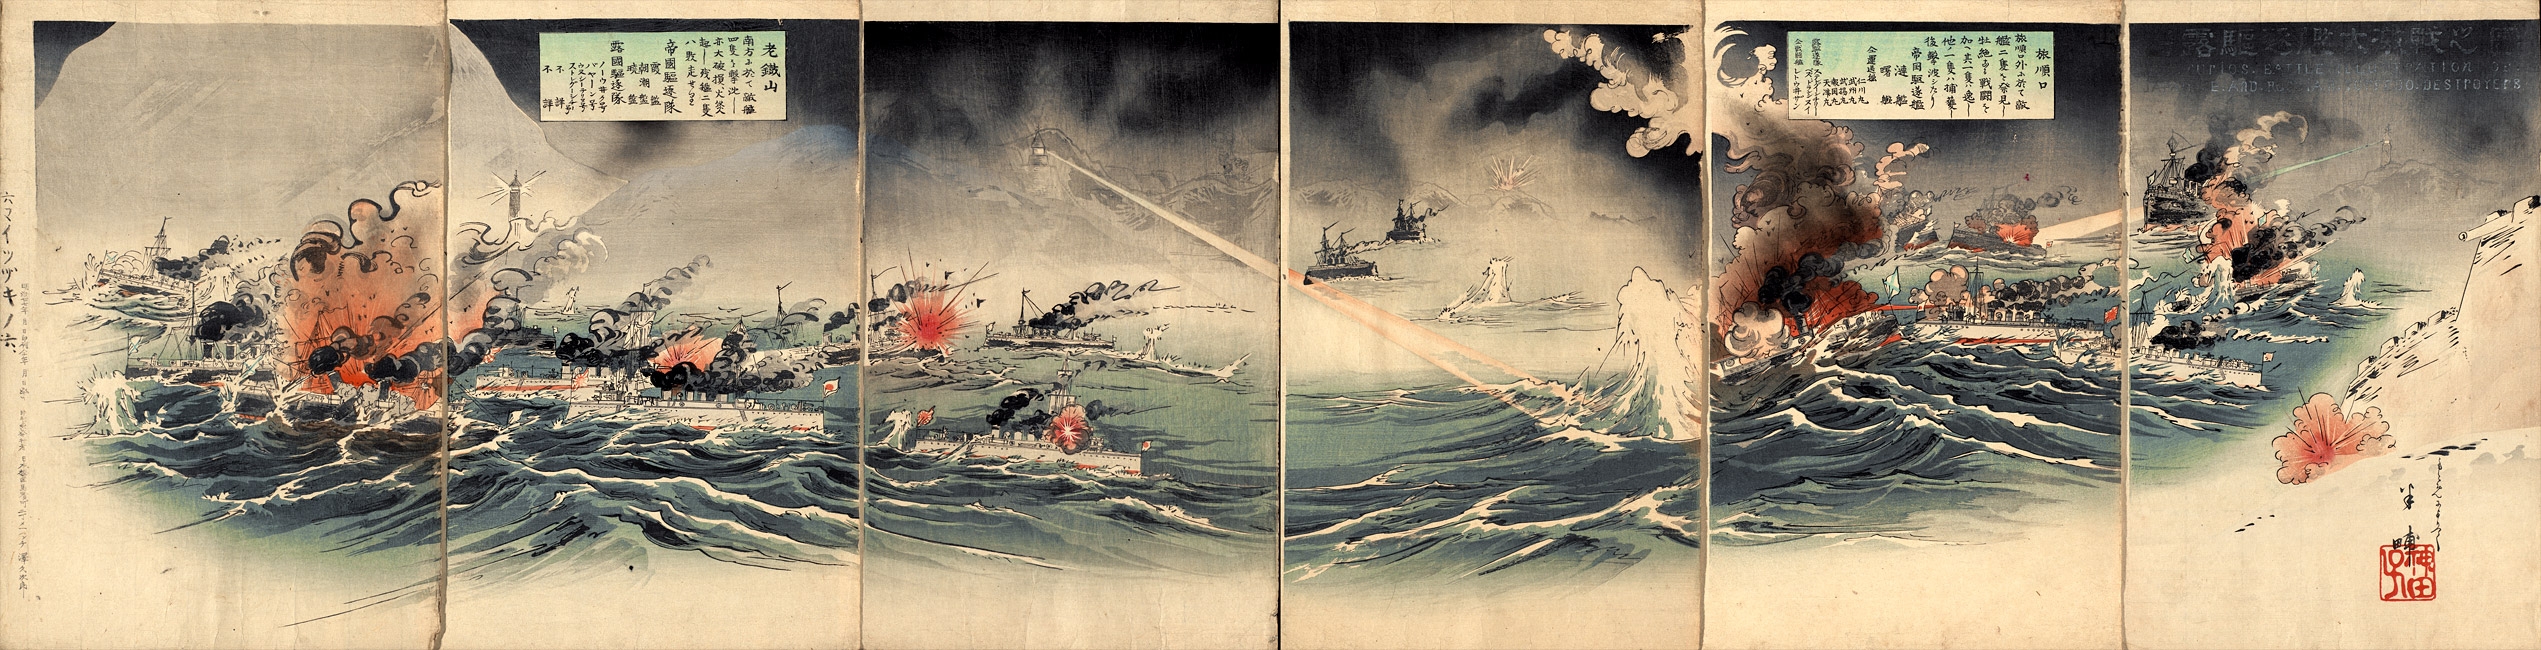 “Illustration of the Furious Battle of Japanese and Russian Torpedo Destroyers outside the Harbor of Port Arthur,” by Yasuda Hanpō, 1904 [2000.72a-f] Sharf Collection, Museum of Fine Arts, Boston